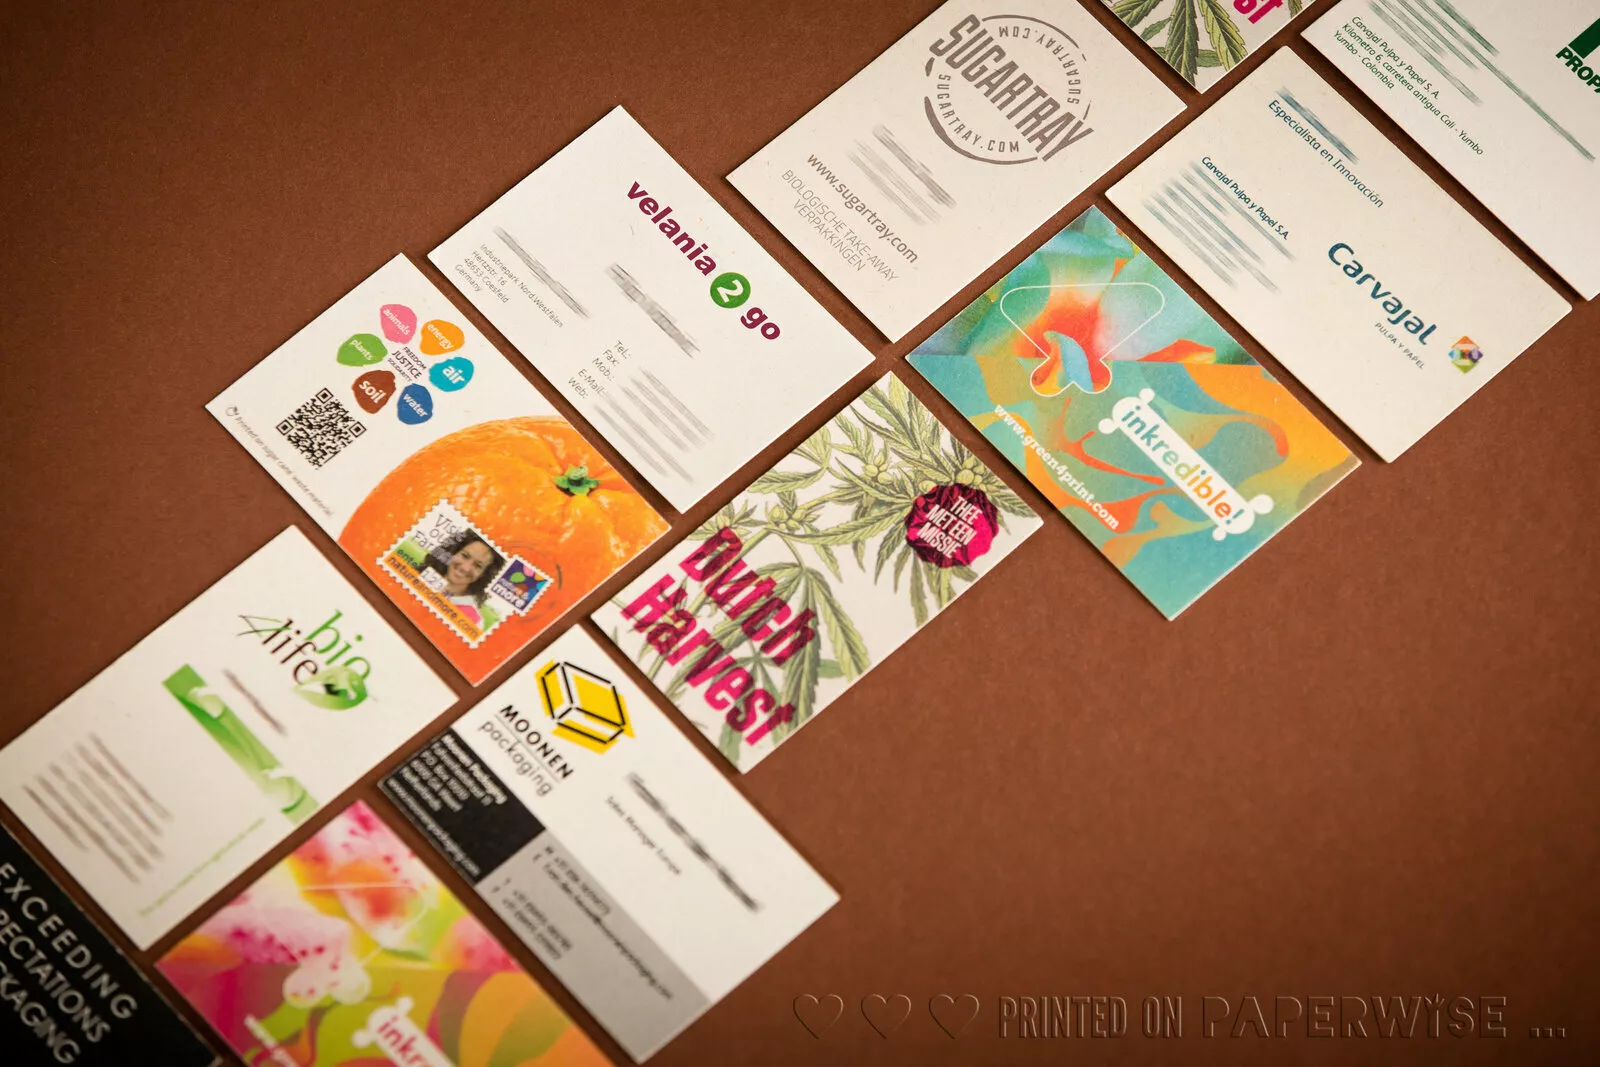 PaperWise eco sustainable paper board printing business cards office promo printingmatters4